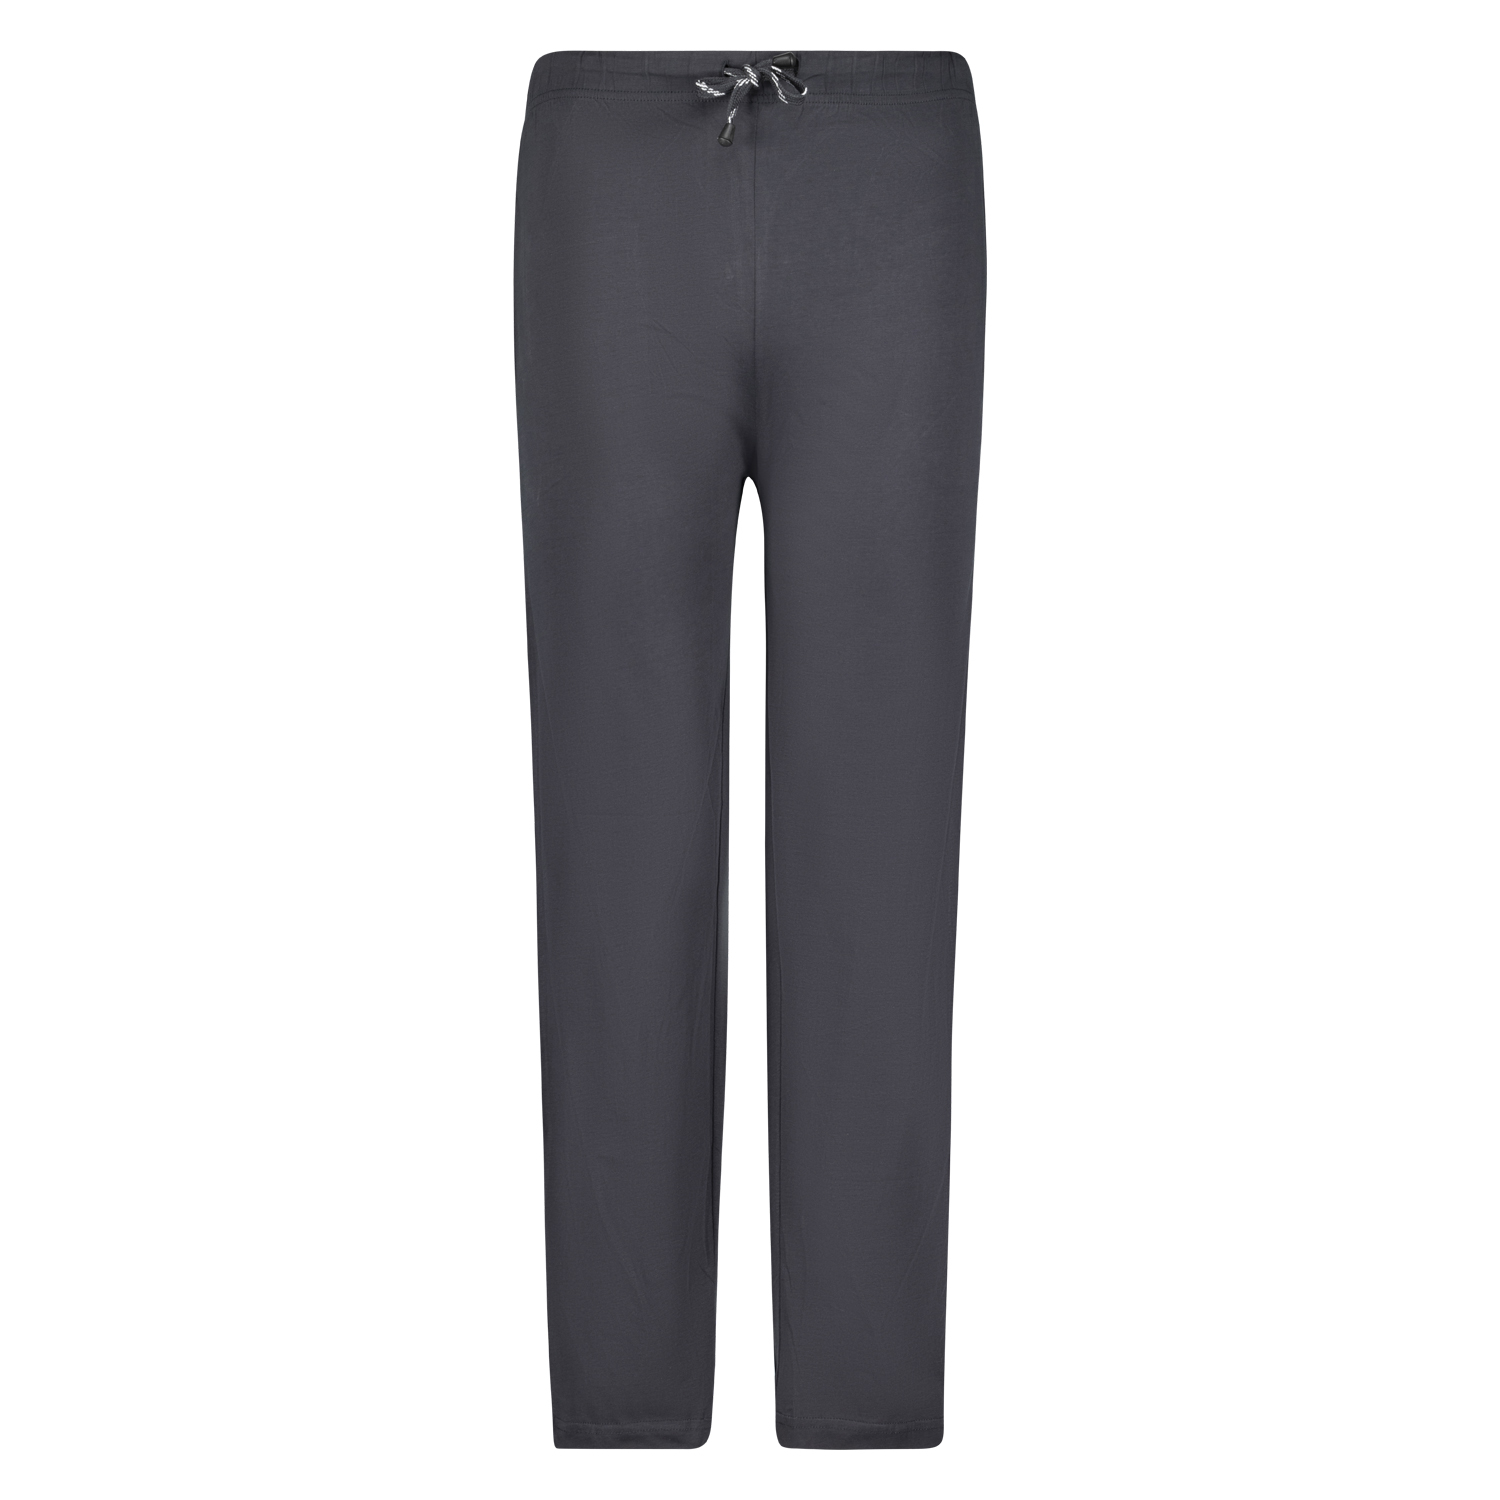 Long pyjama pants in anthracite by ADAMO in plus sizes up to 10XL and 122